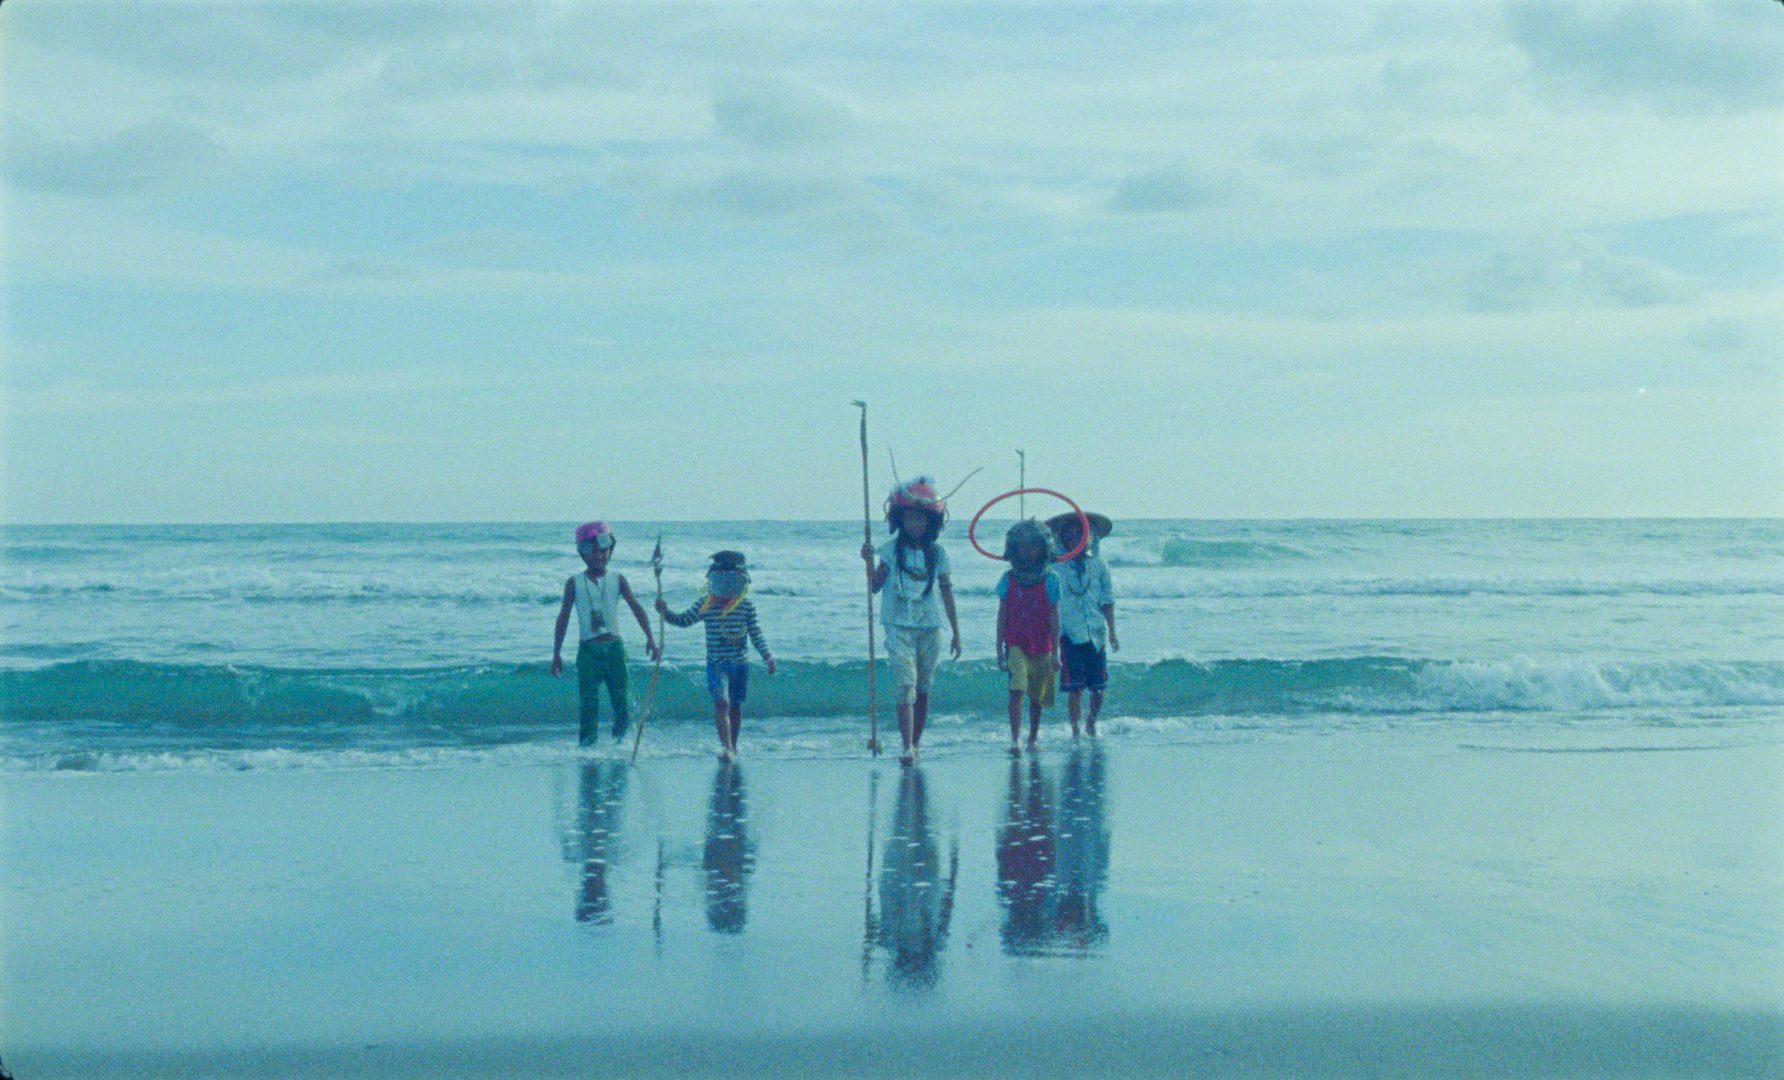 A row of 5 children standing by the waves wearing different ornamental headgear